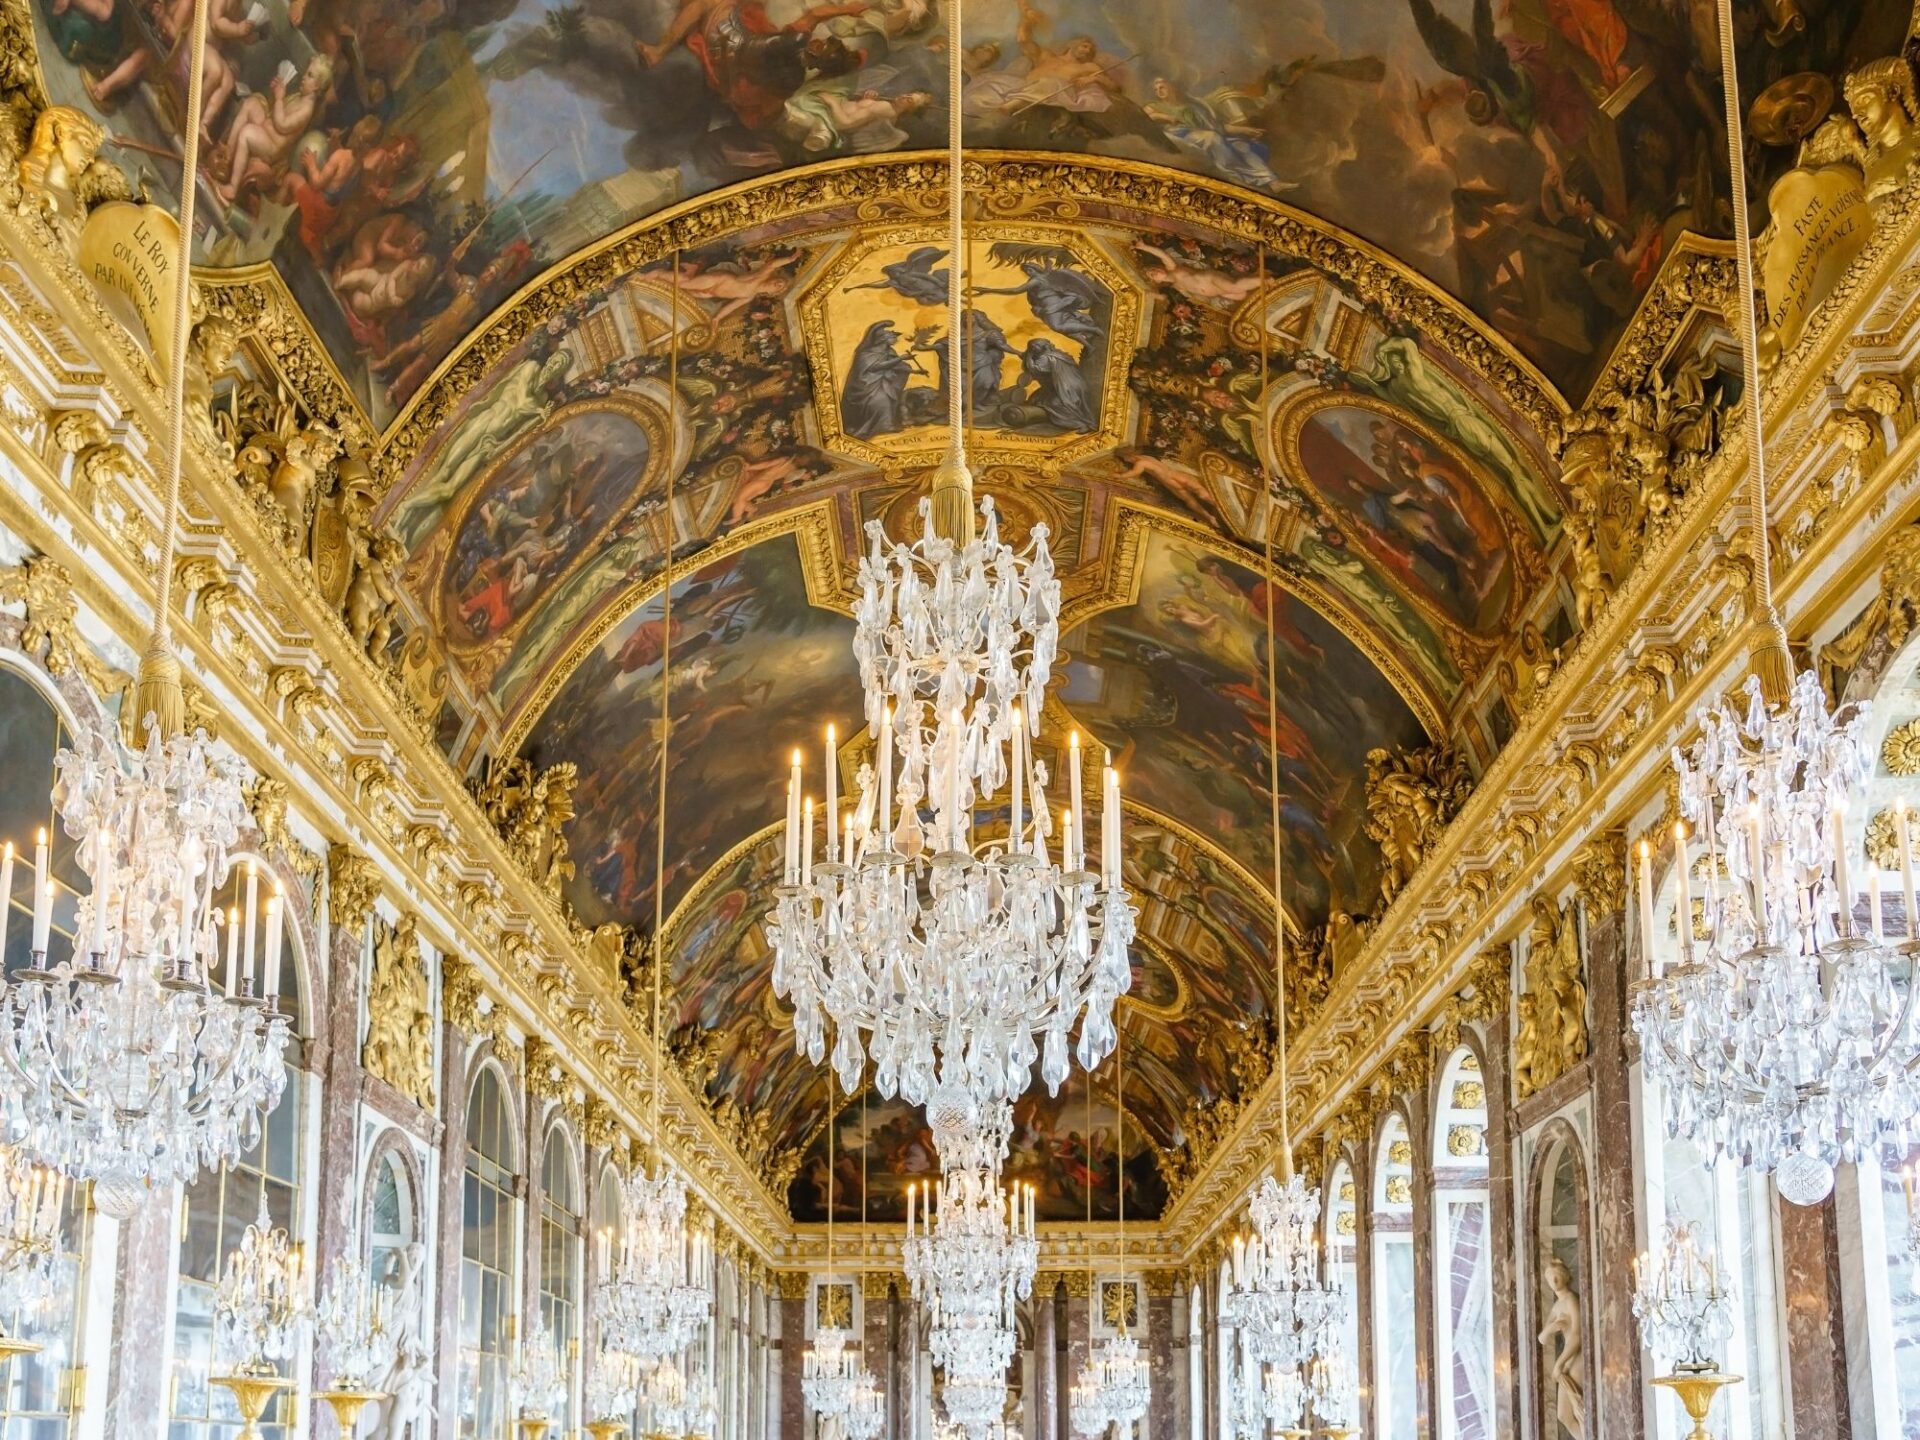 Things to do in Paris - Visit the palace of versailles